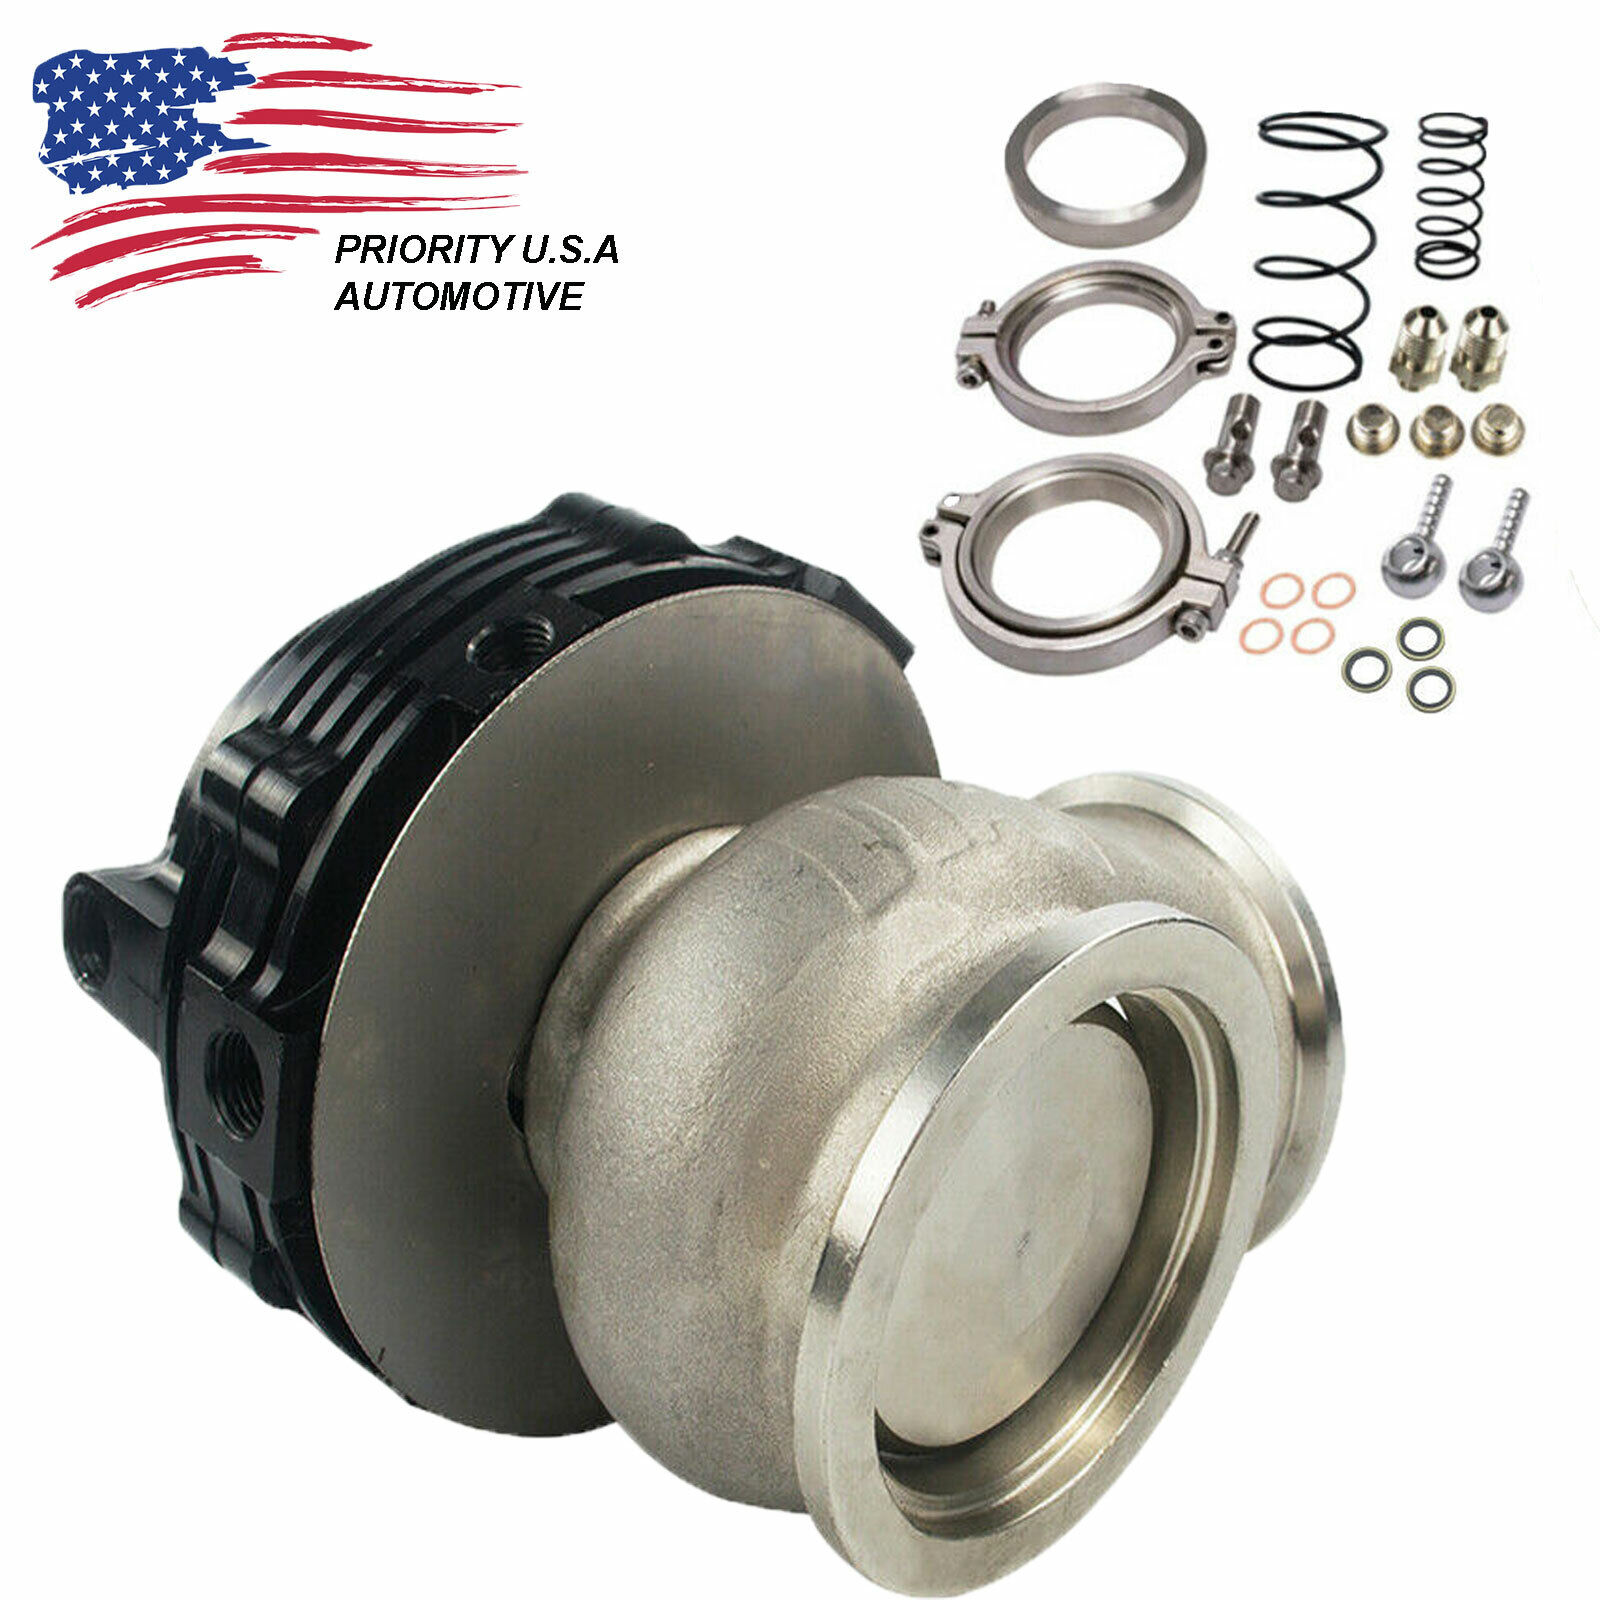 For Tial 44mm External Wastegate MVR V-Band Flange Turbo USA 2-3 Day Delivery 